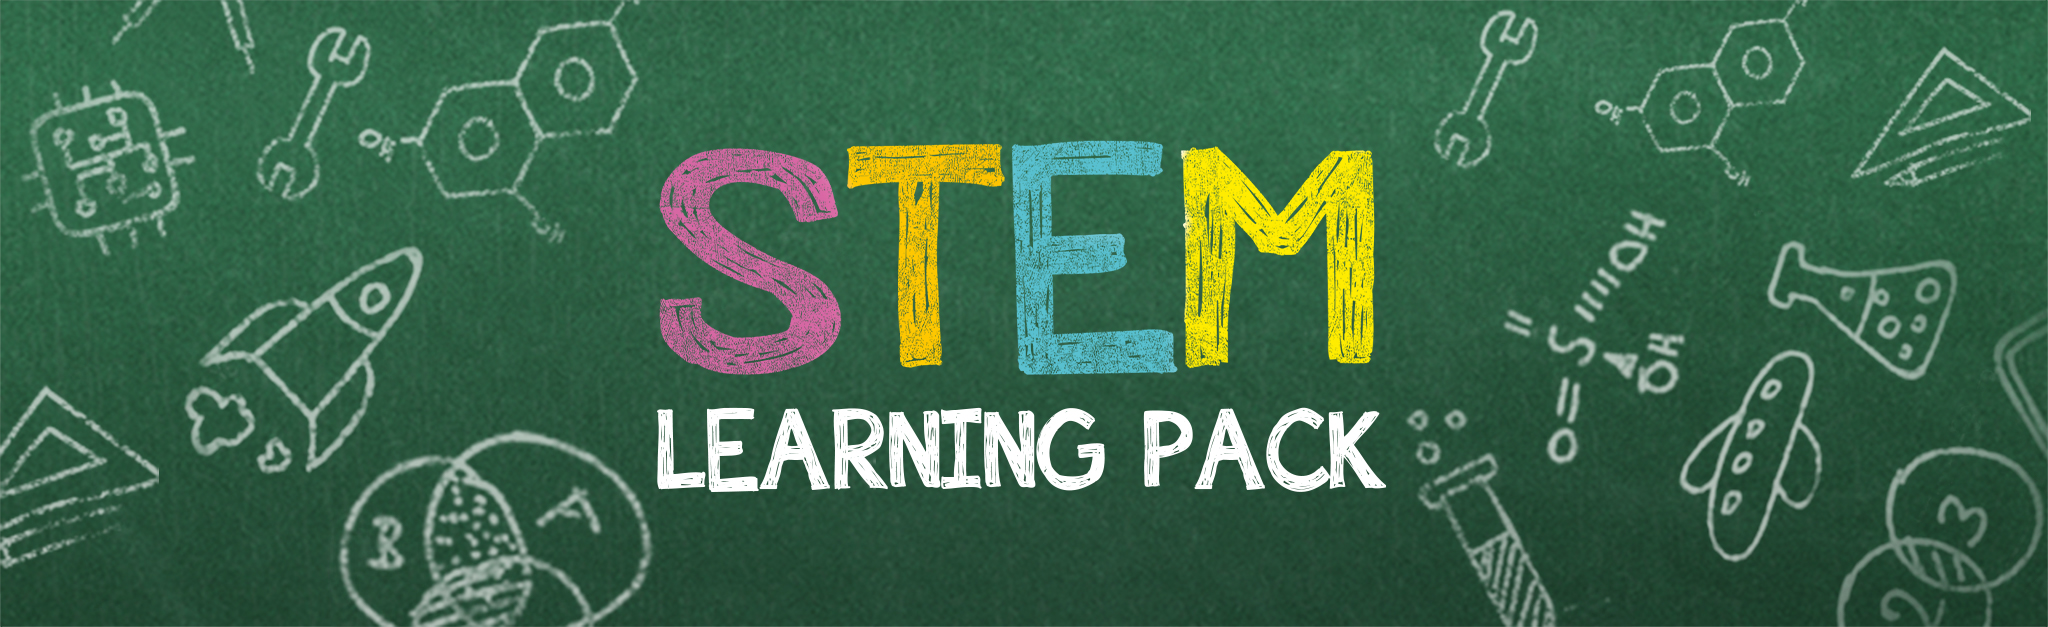 STEM Learning Pack, Visit Now TV Facebook to win a prize